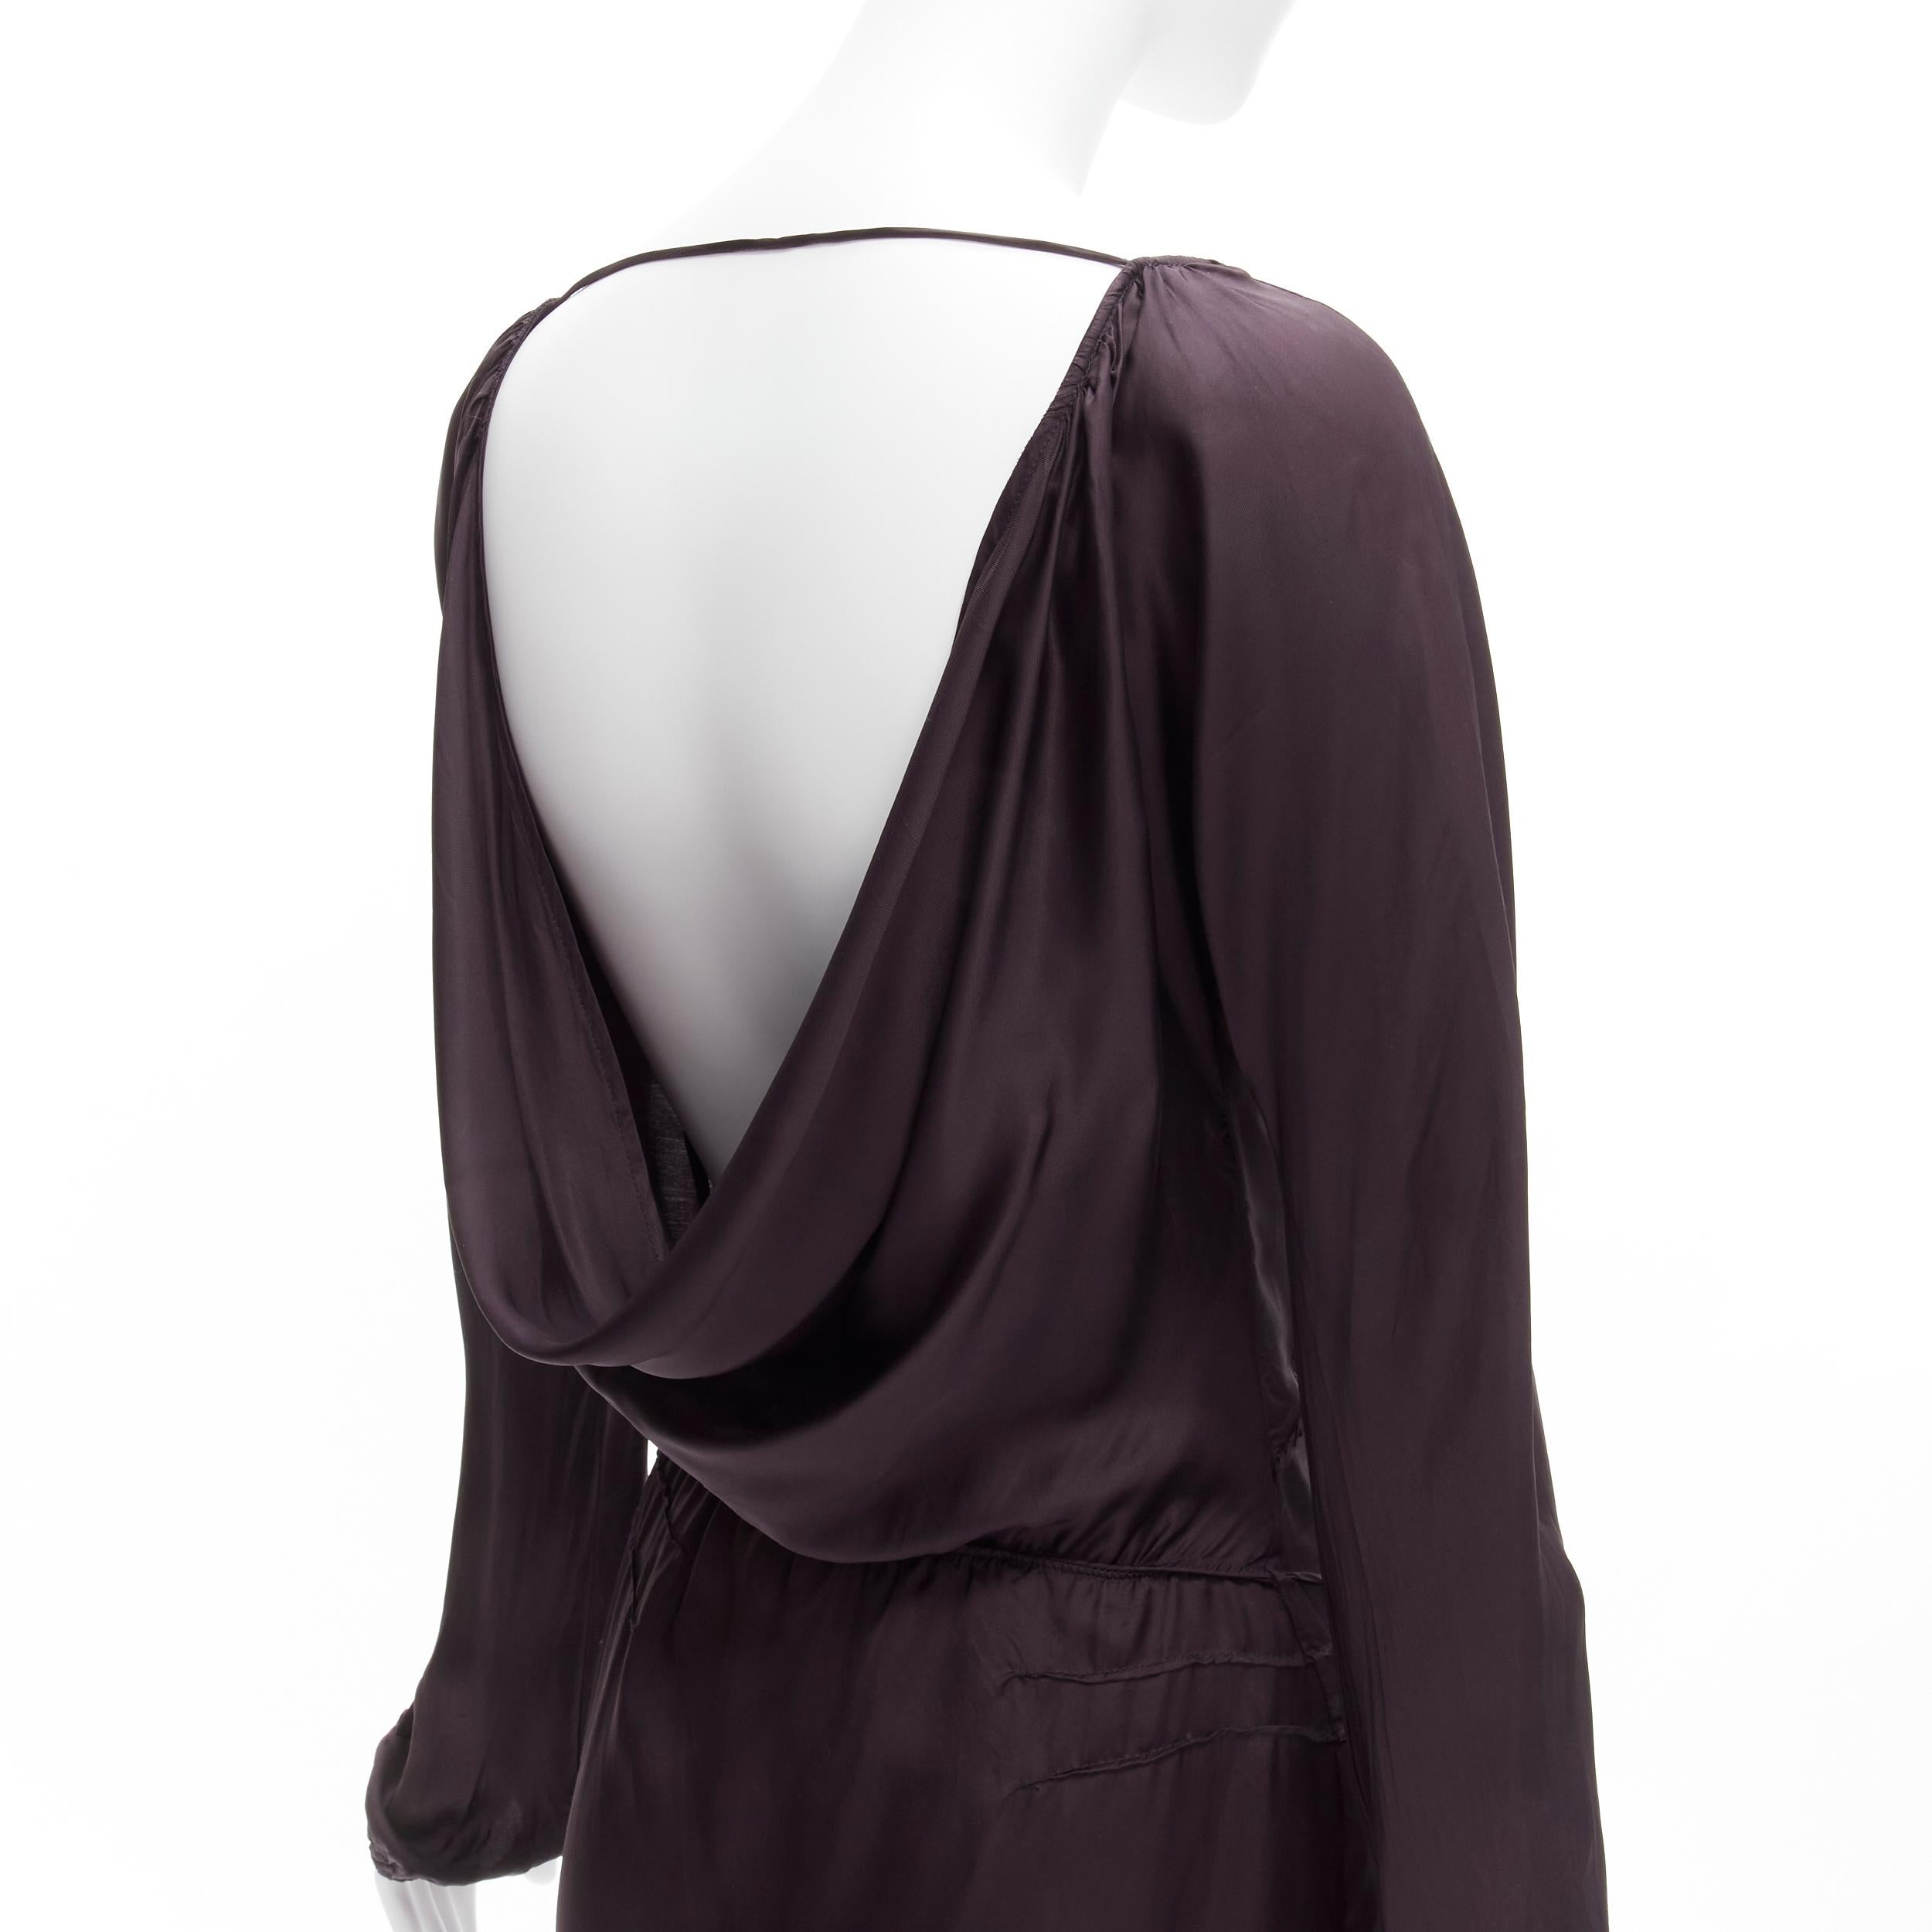 GUCCI Tom Ford 2002 Vintage dark purple satin laced neckline mini dress IT38 XS
Reference: ANWU/A00677
Brand: Gucci
Designer: Tom Ford
Collection: SS 2002
Material: Rayon
Color: Purple
Pattern: Solid
Closure: Lace Up
Extra Details: Inspired by the